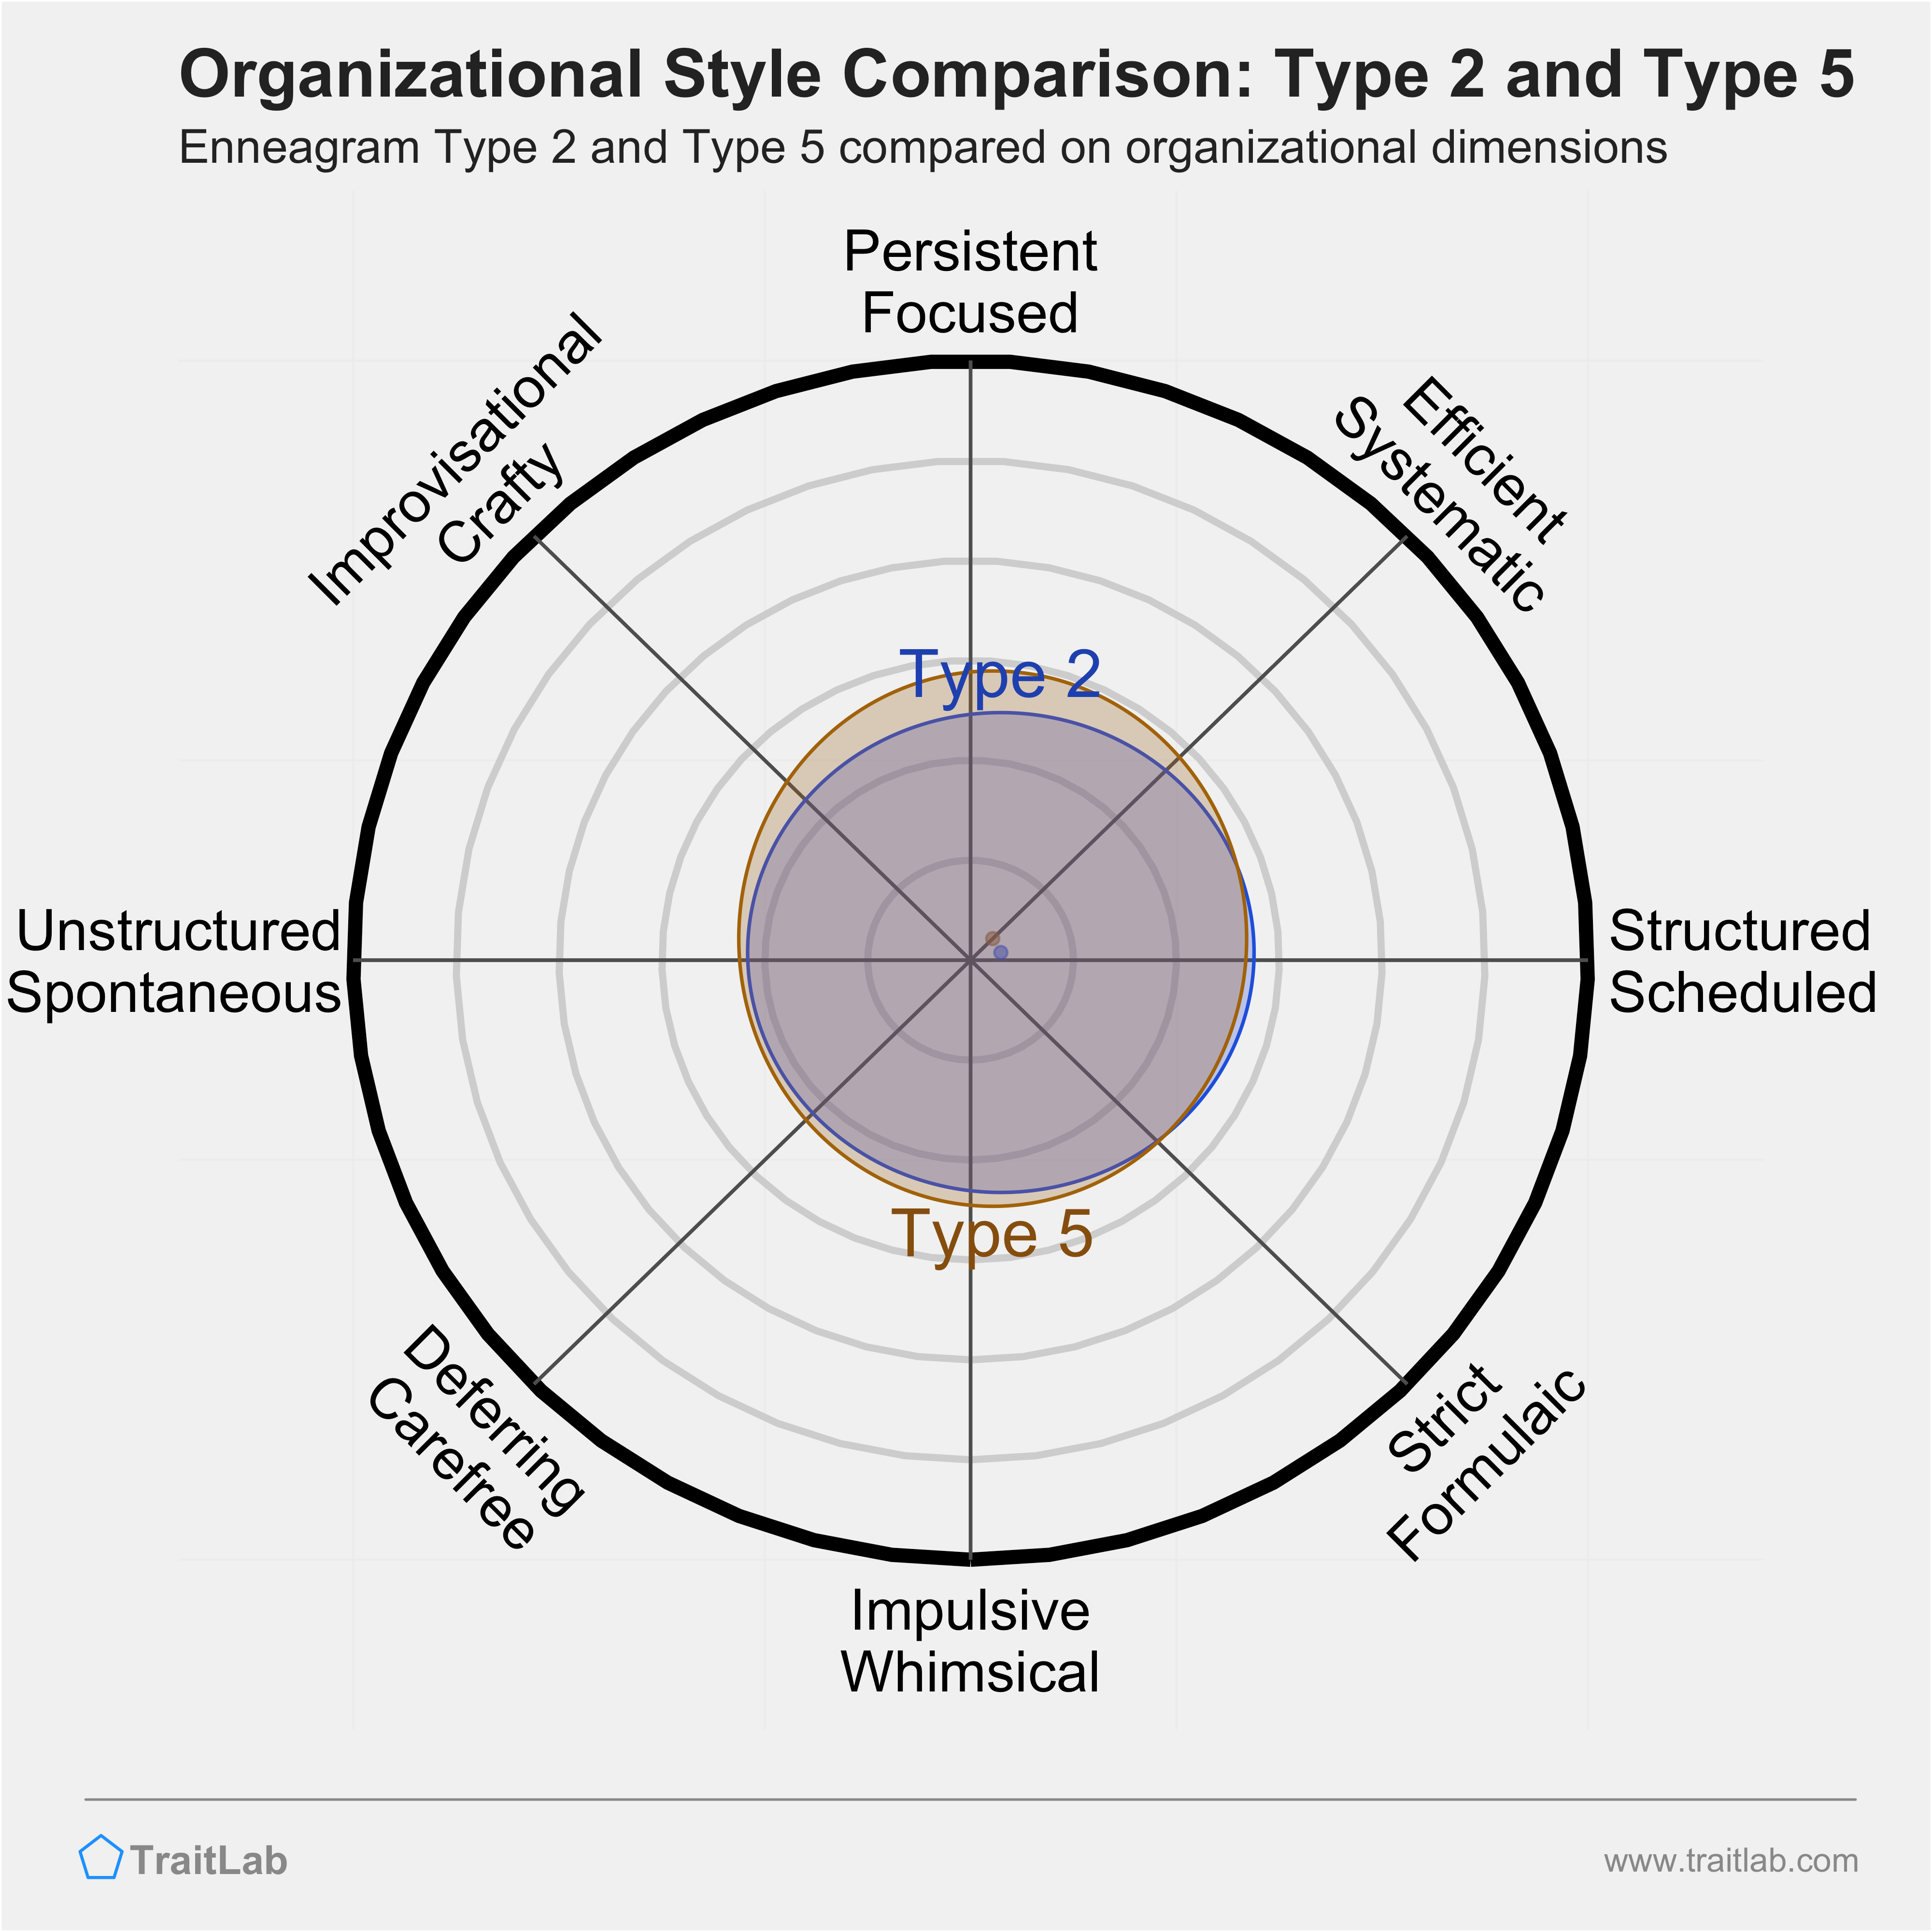 Type 2 and Type 5 comparison across organizational dimensions